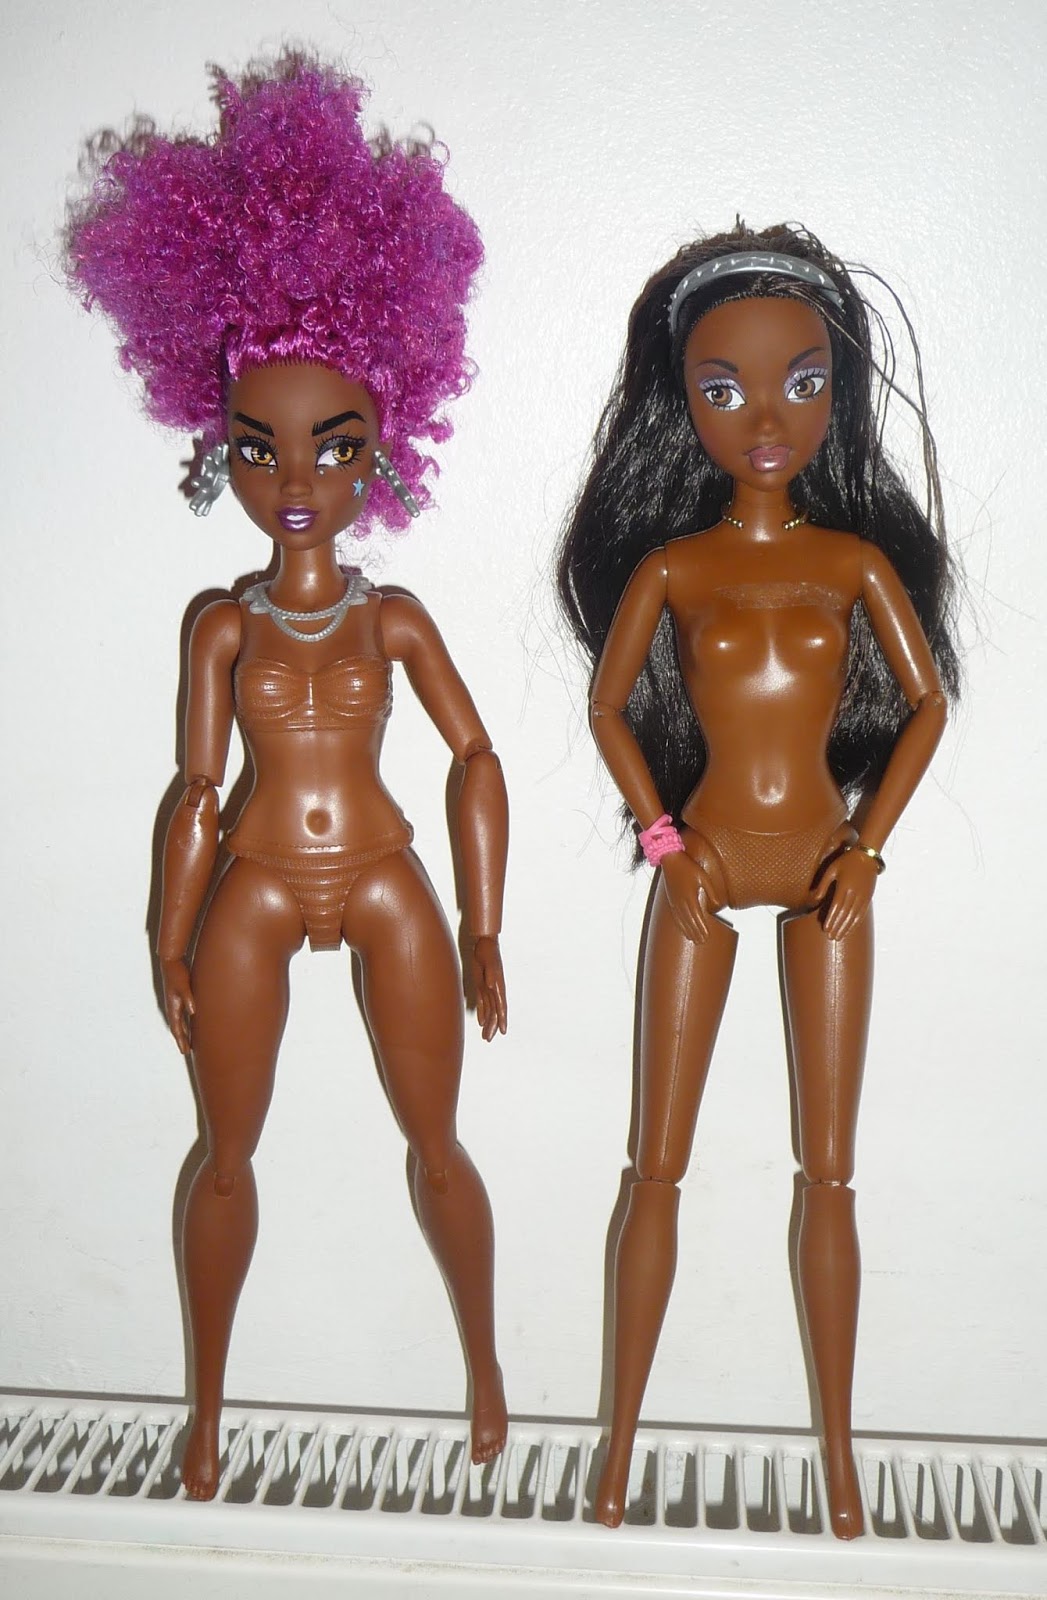 The hips compared to a modern Barbie body shows a narrower chest and broade...